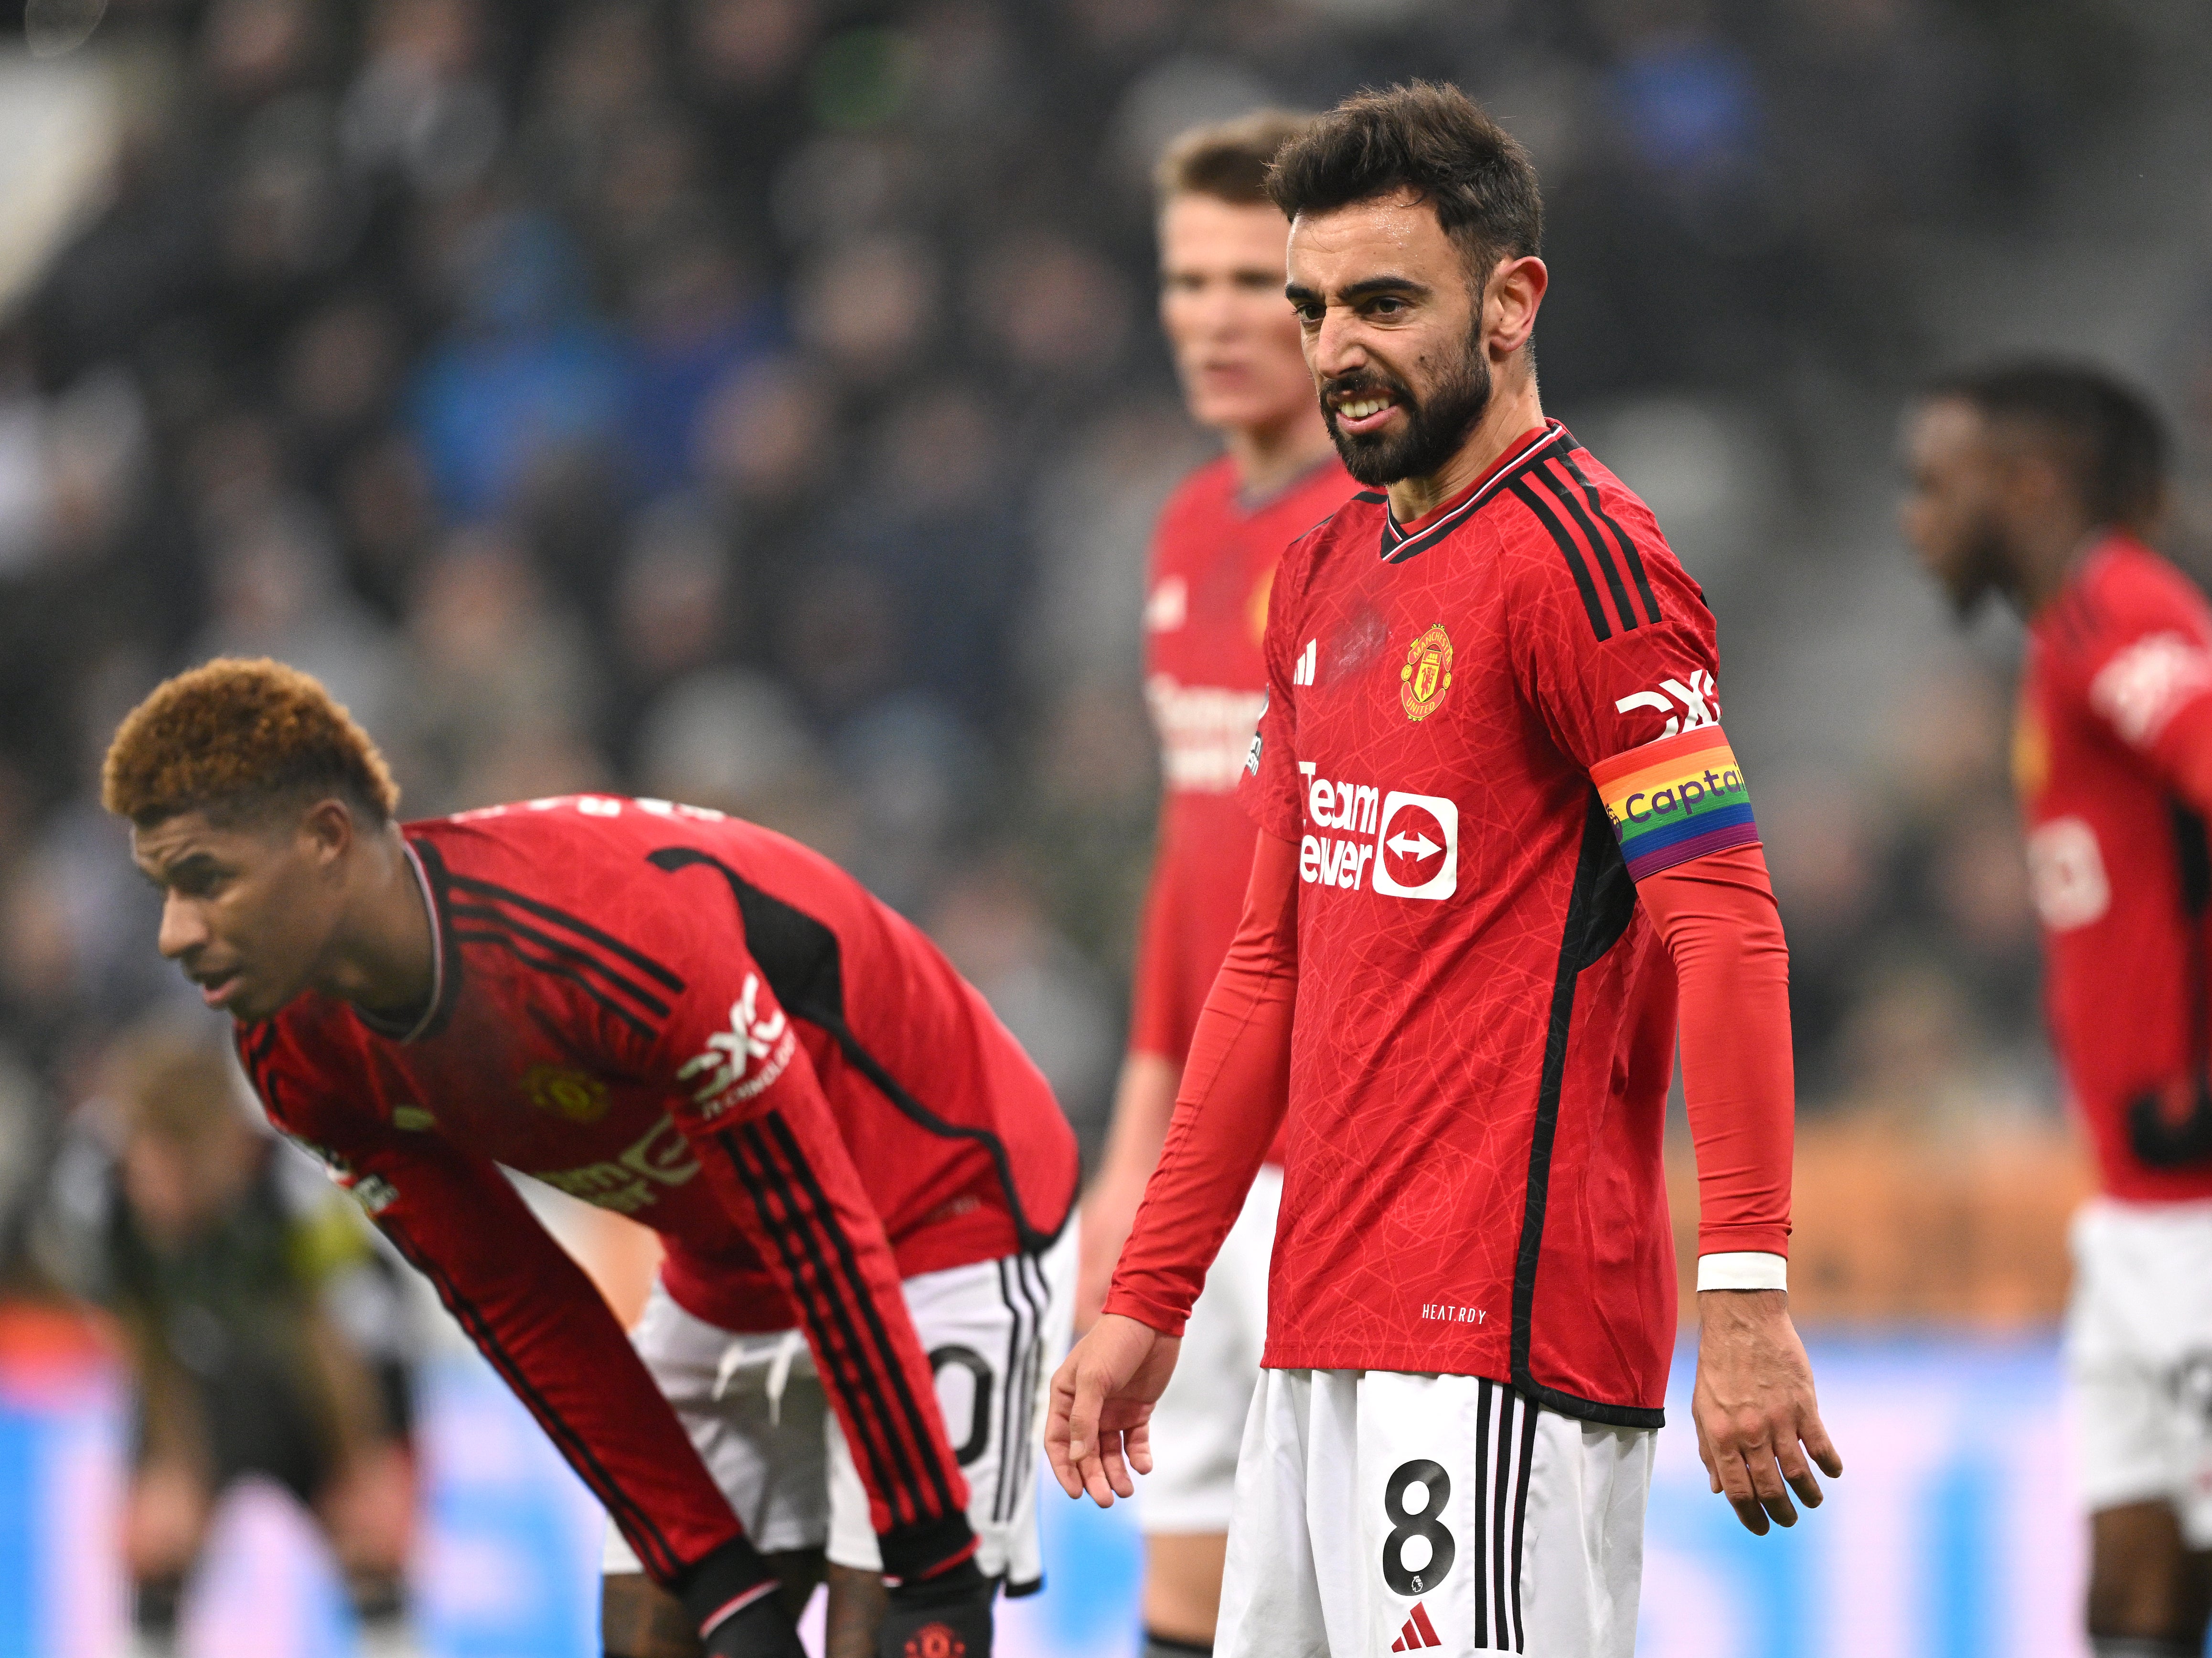 Not at the races: on Saturday, Marcus Rashford, Bruno Fernandes and company were outrun and outworked by a Newcastle team who had every right to feel more fatigued